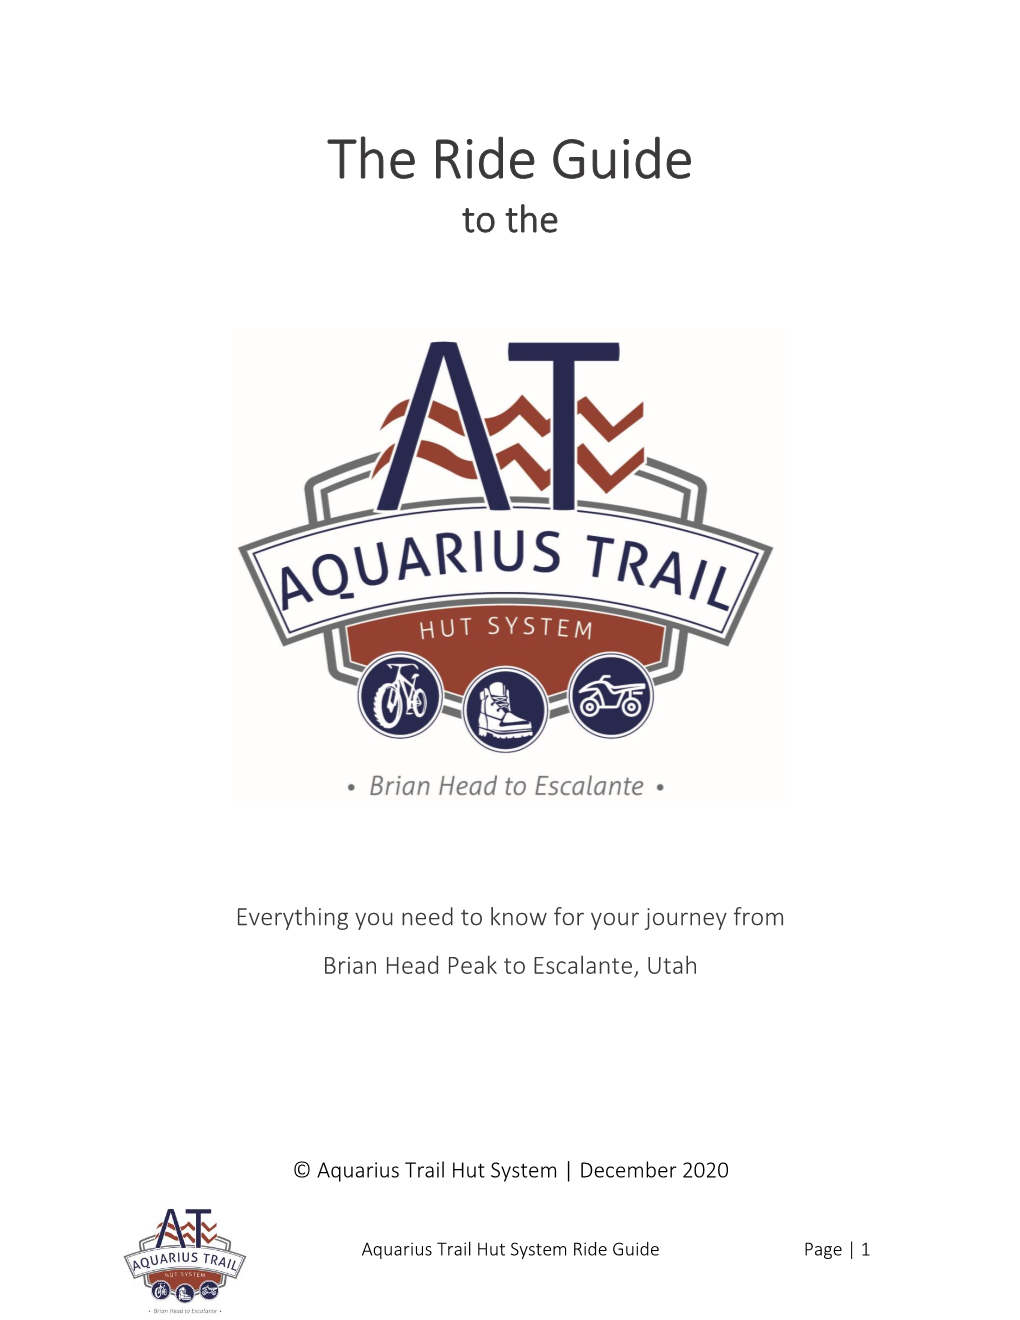 The Ride Guide to The